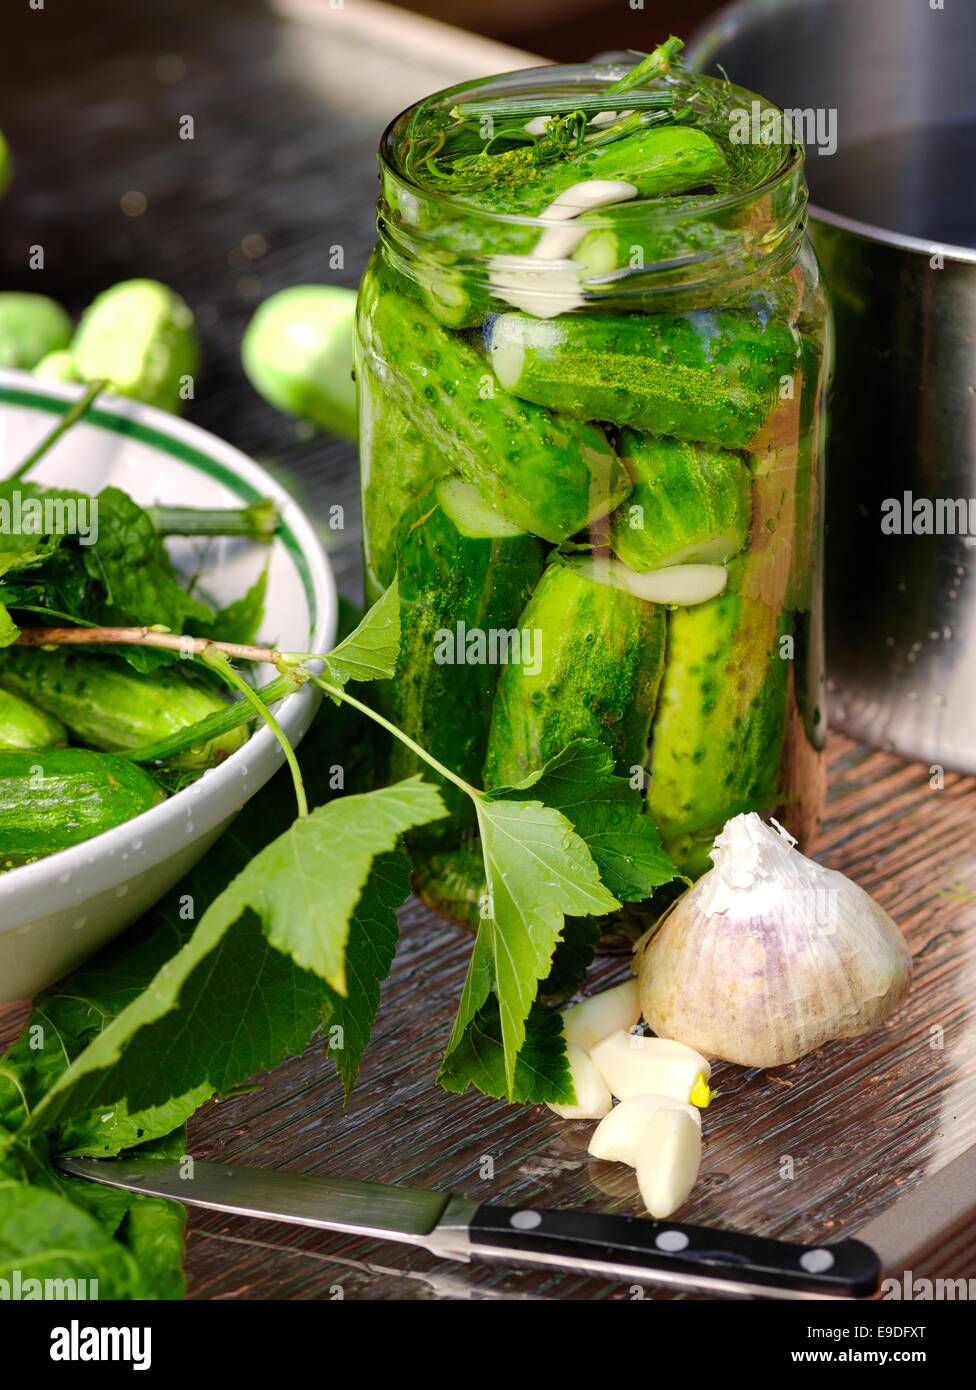 Pickles stuffed in the glass jars ready for pickling. Stock Photo